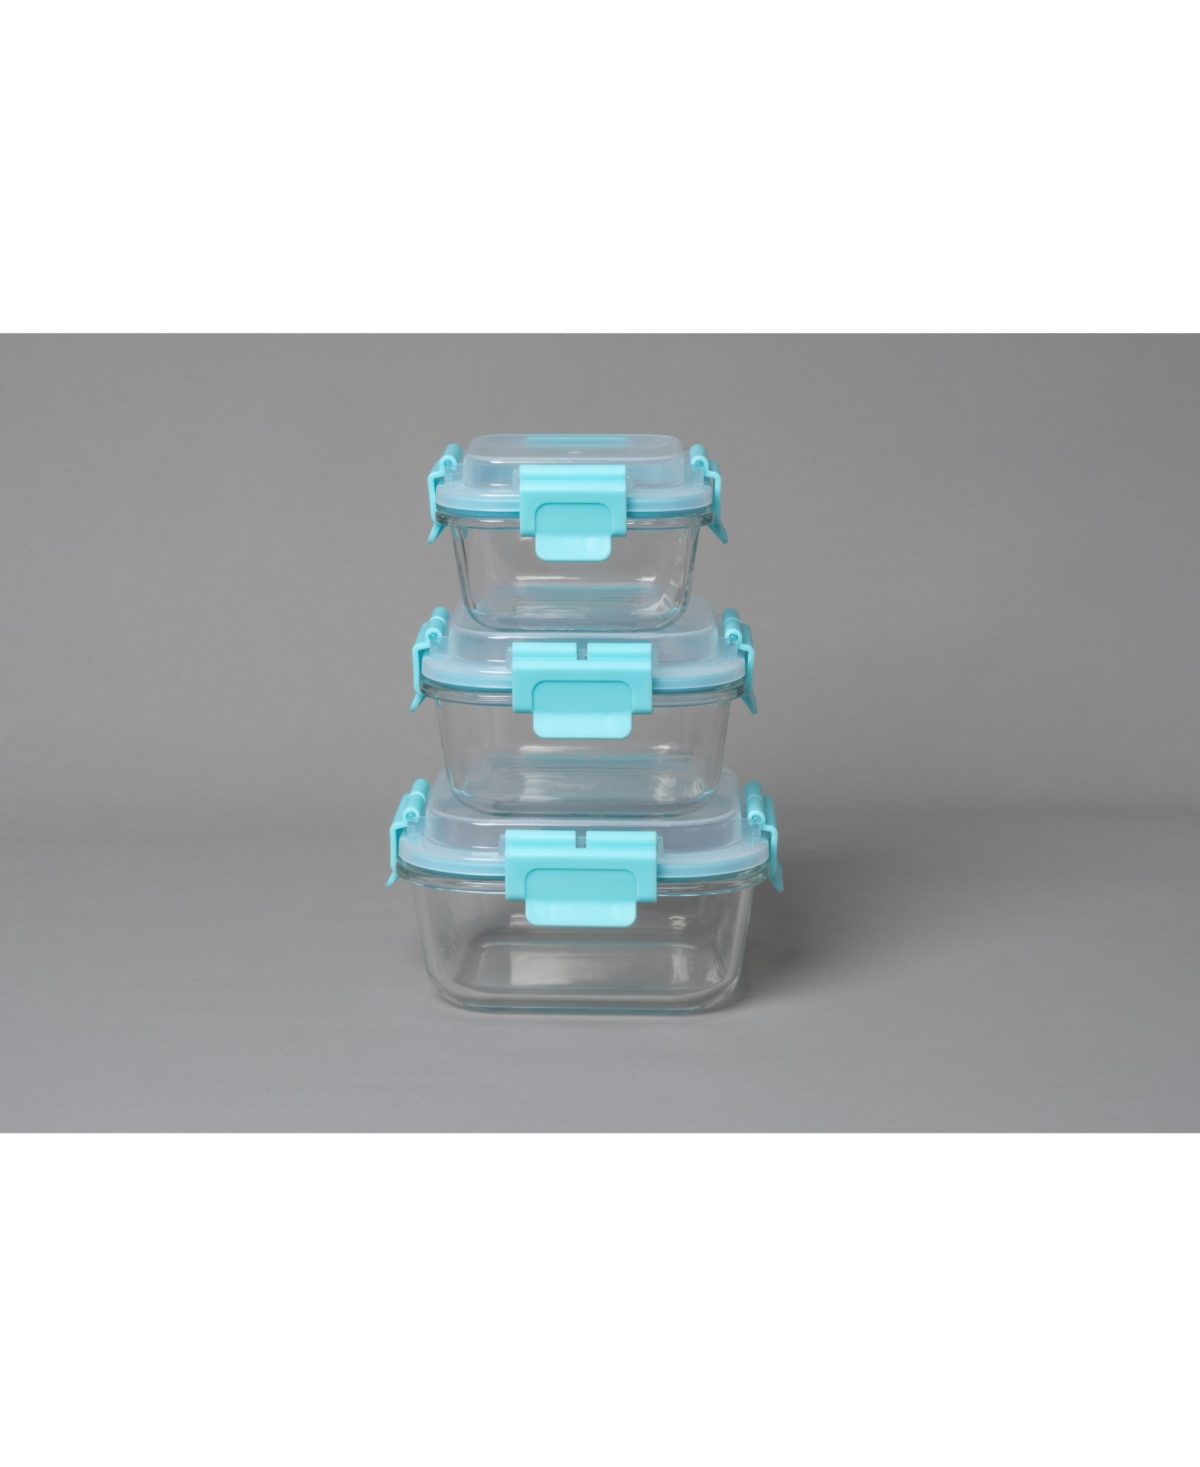 Shop Genicook 3 Pc Square Container Hi-top Lids With Pro Grade Removable Lockdown Levers Set In Aqua Blue